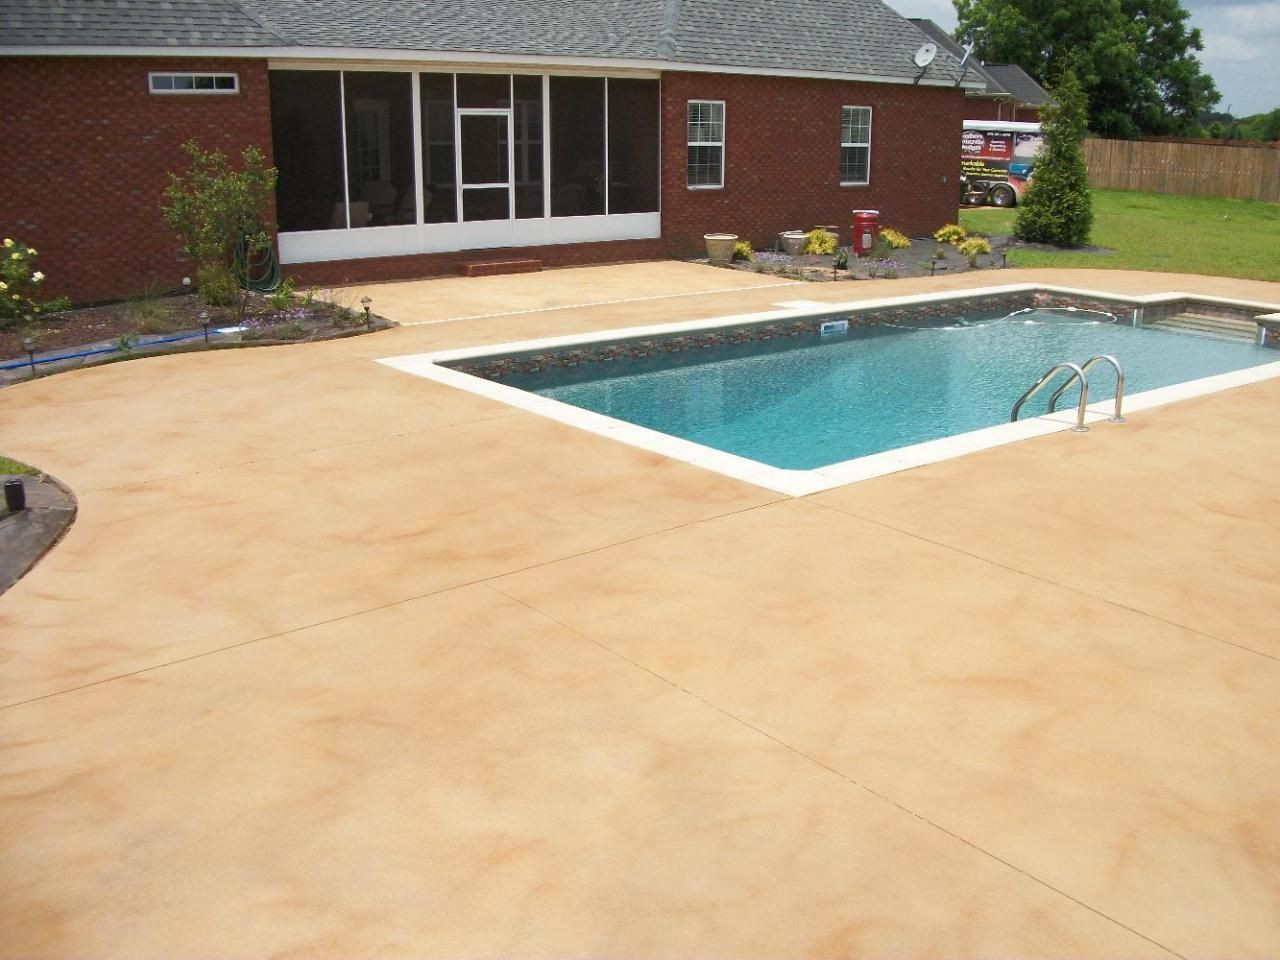 Swimming Pool Deck Paint
 best colors for a cement pool deck Google Search in 2019